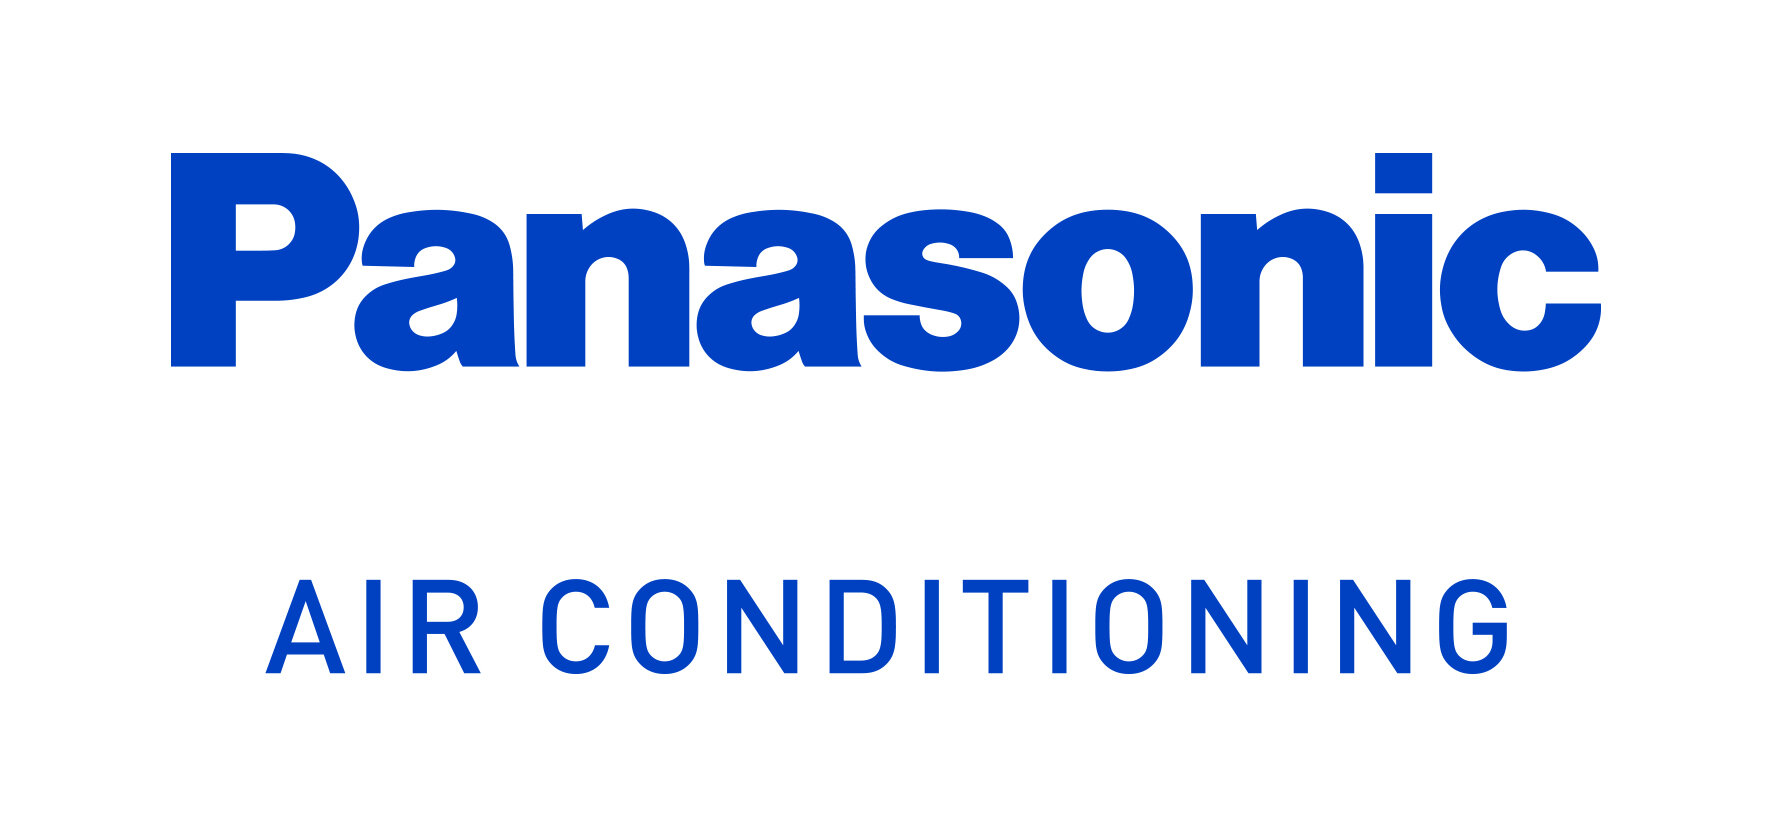 Panasonic Air Conditioning proudly installed by Hunter Valley Appliance Repairs